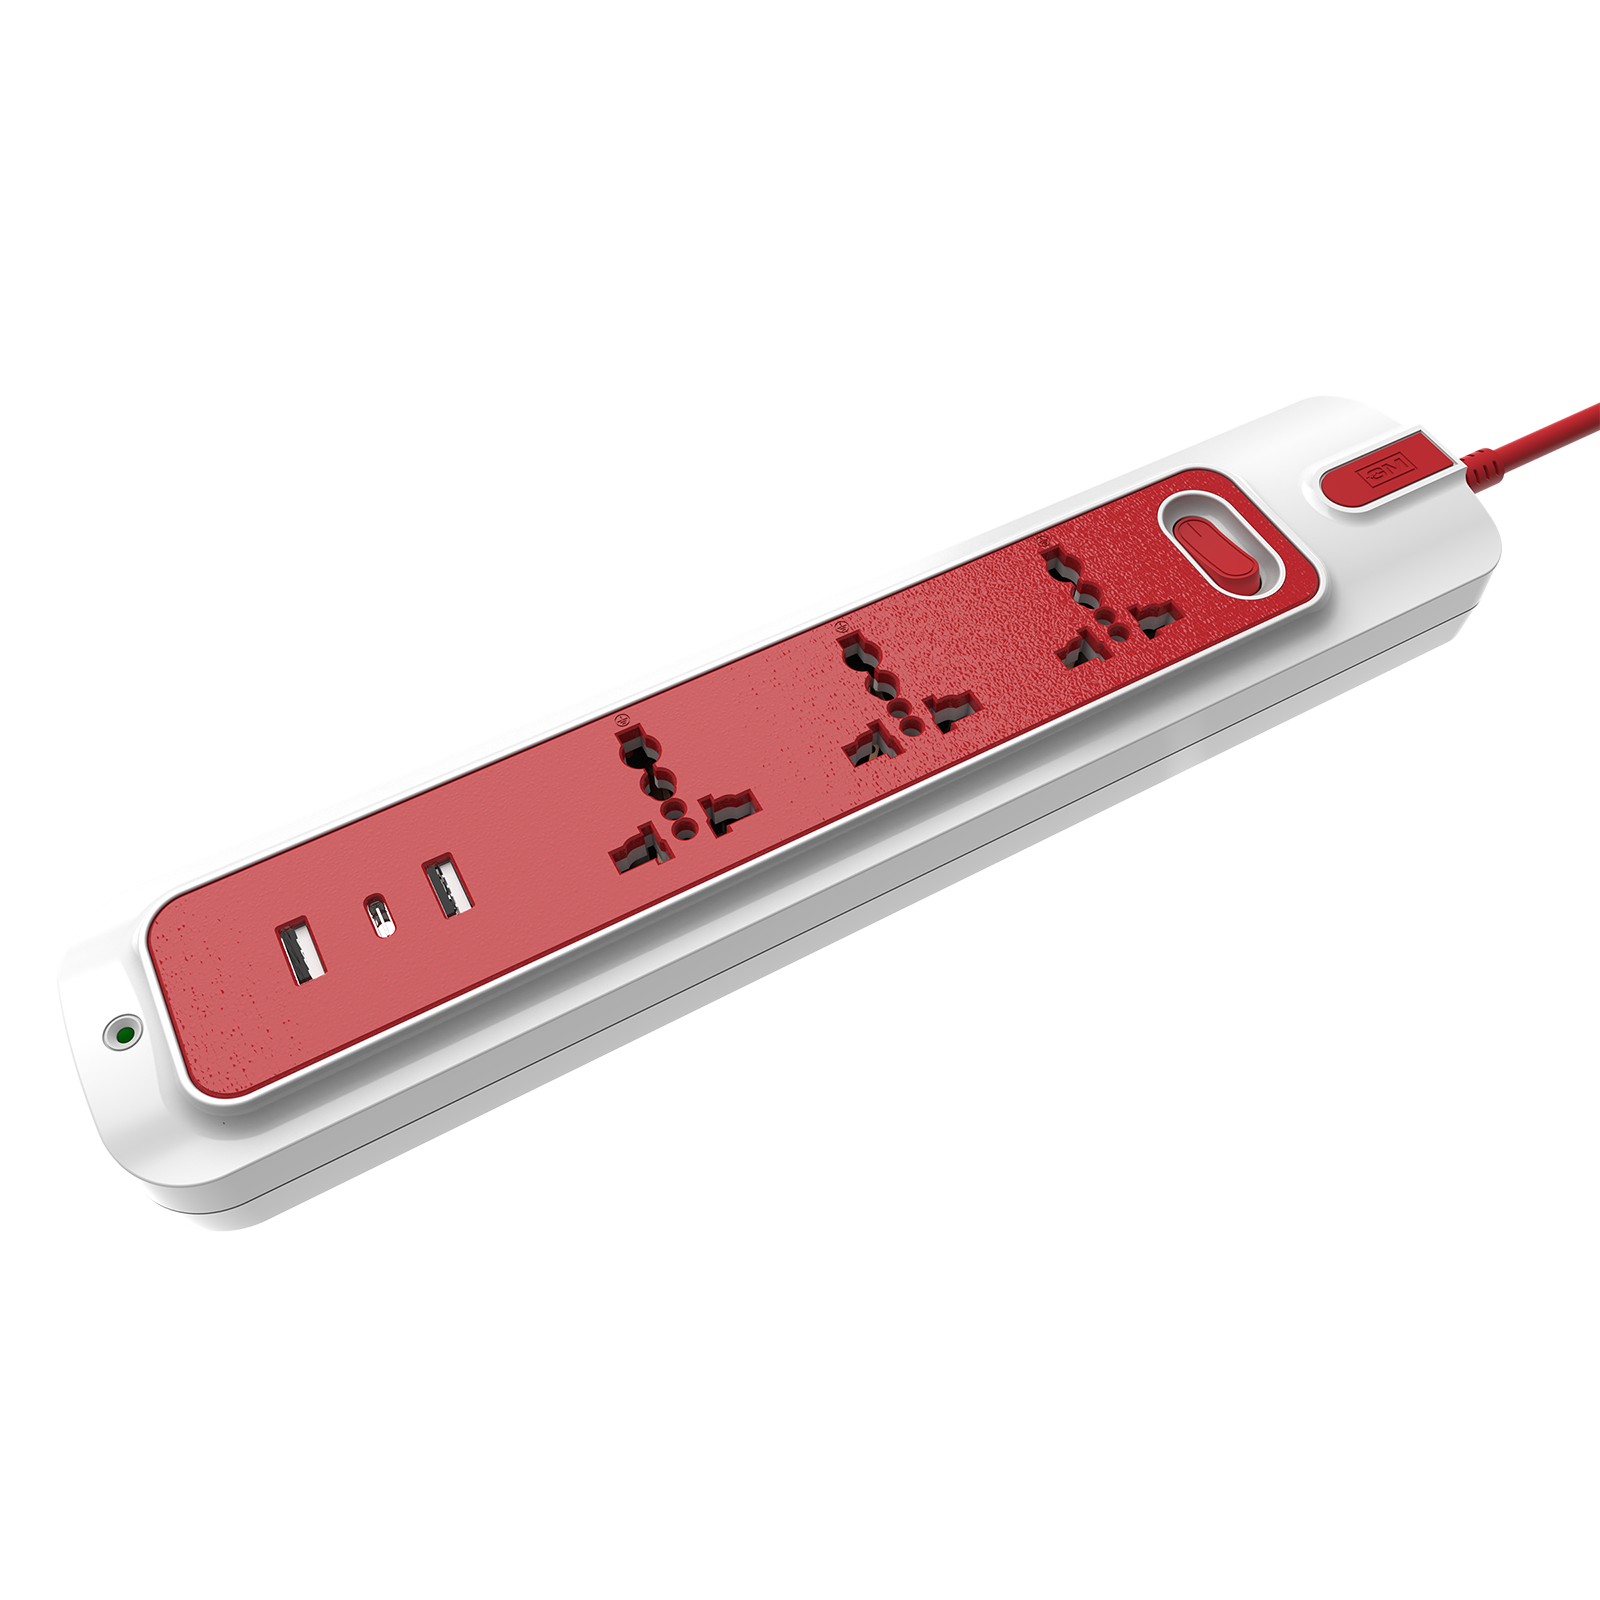 GM Lemoid 10 Amps 3 Sockets Surge Protector (Thermal Trip Technology, 3290, Red/White)